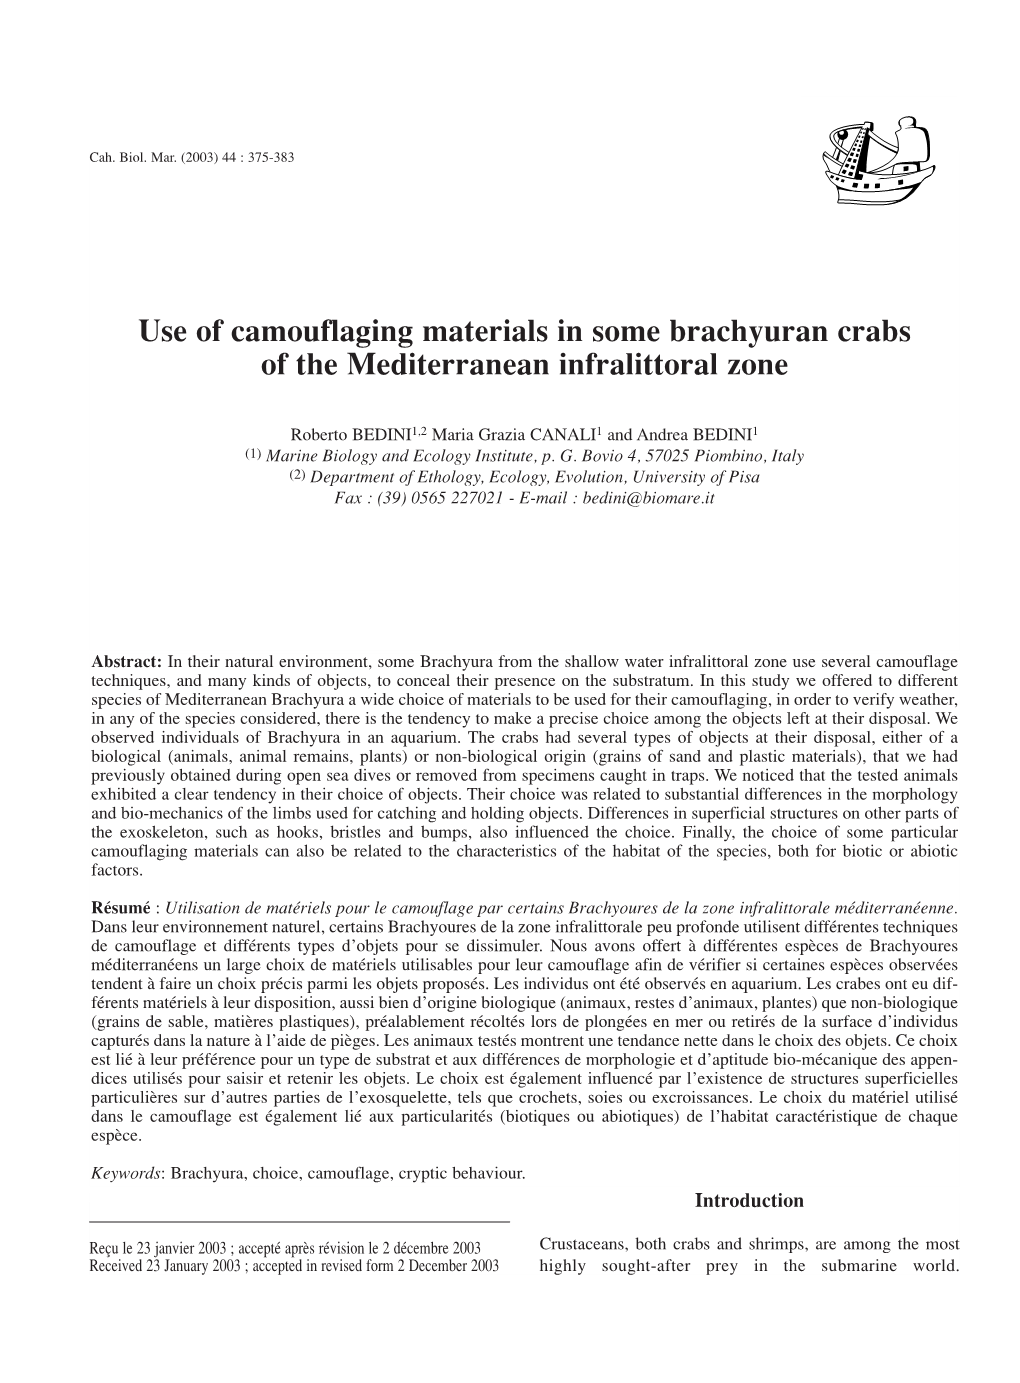 Use of Camouflaging Materials in Some Brachyuran Crabs of the Mediterranean Infralittoral Zone